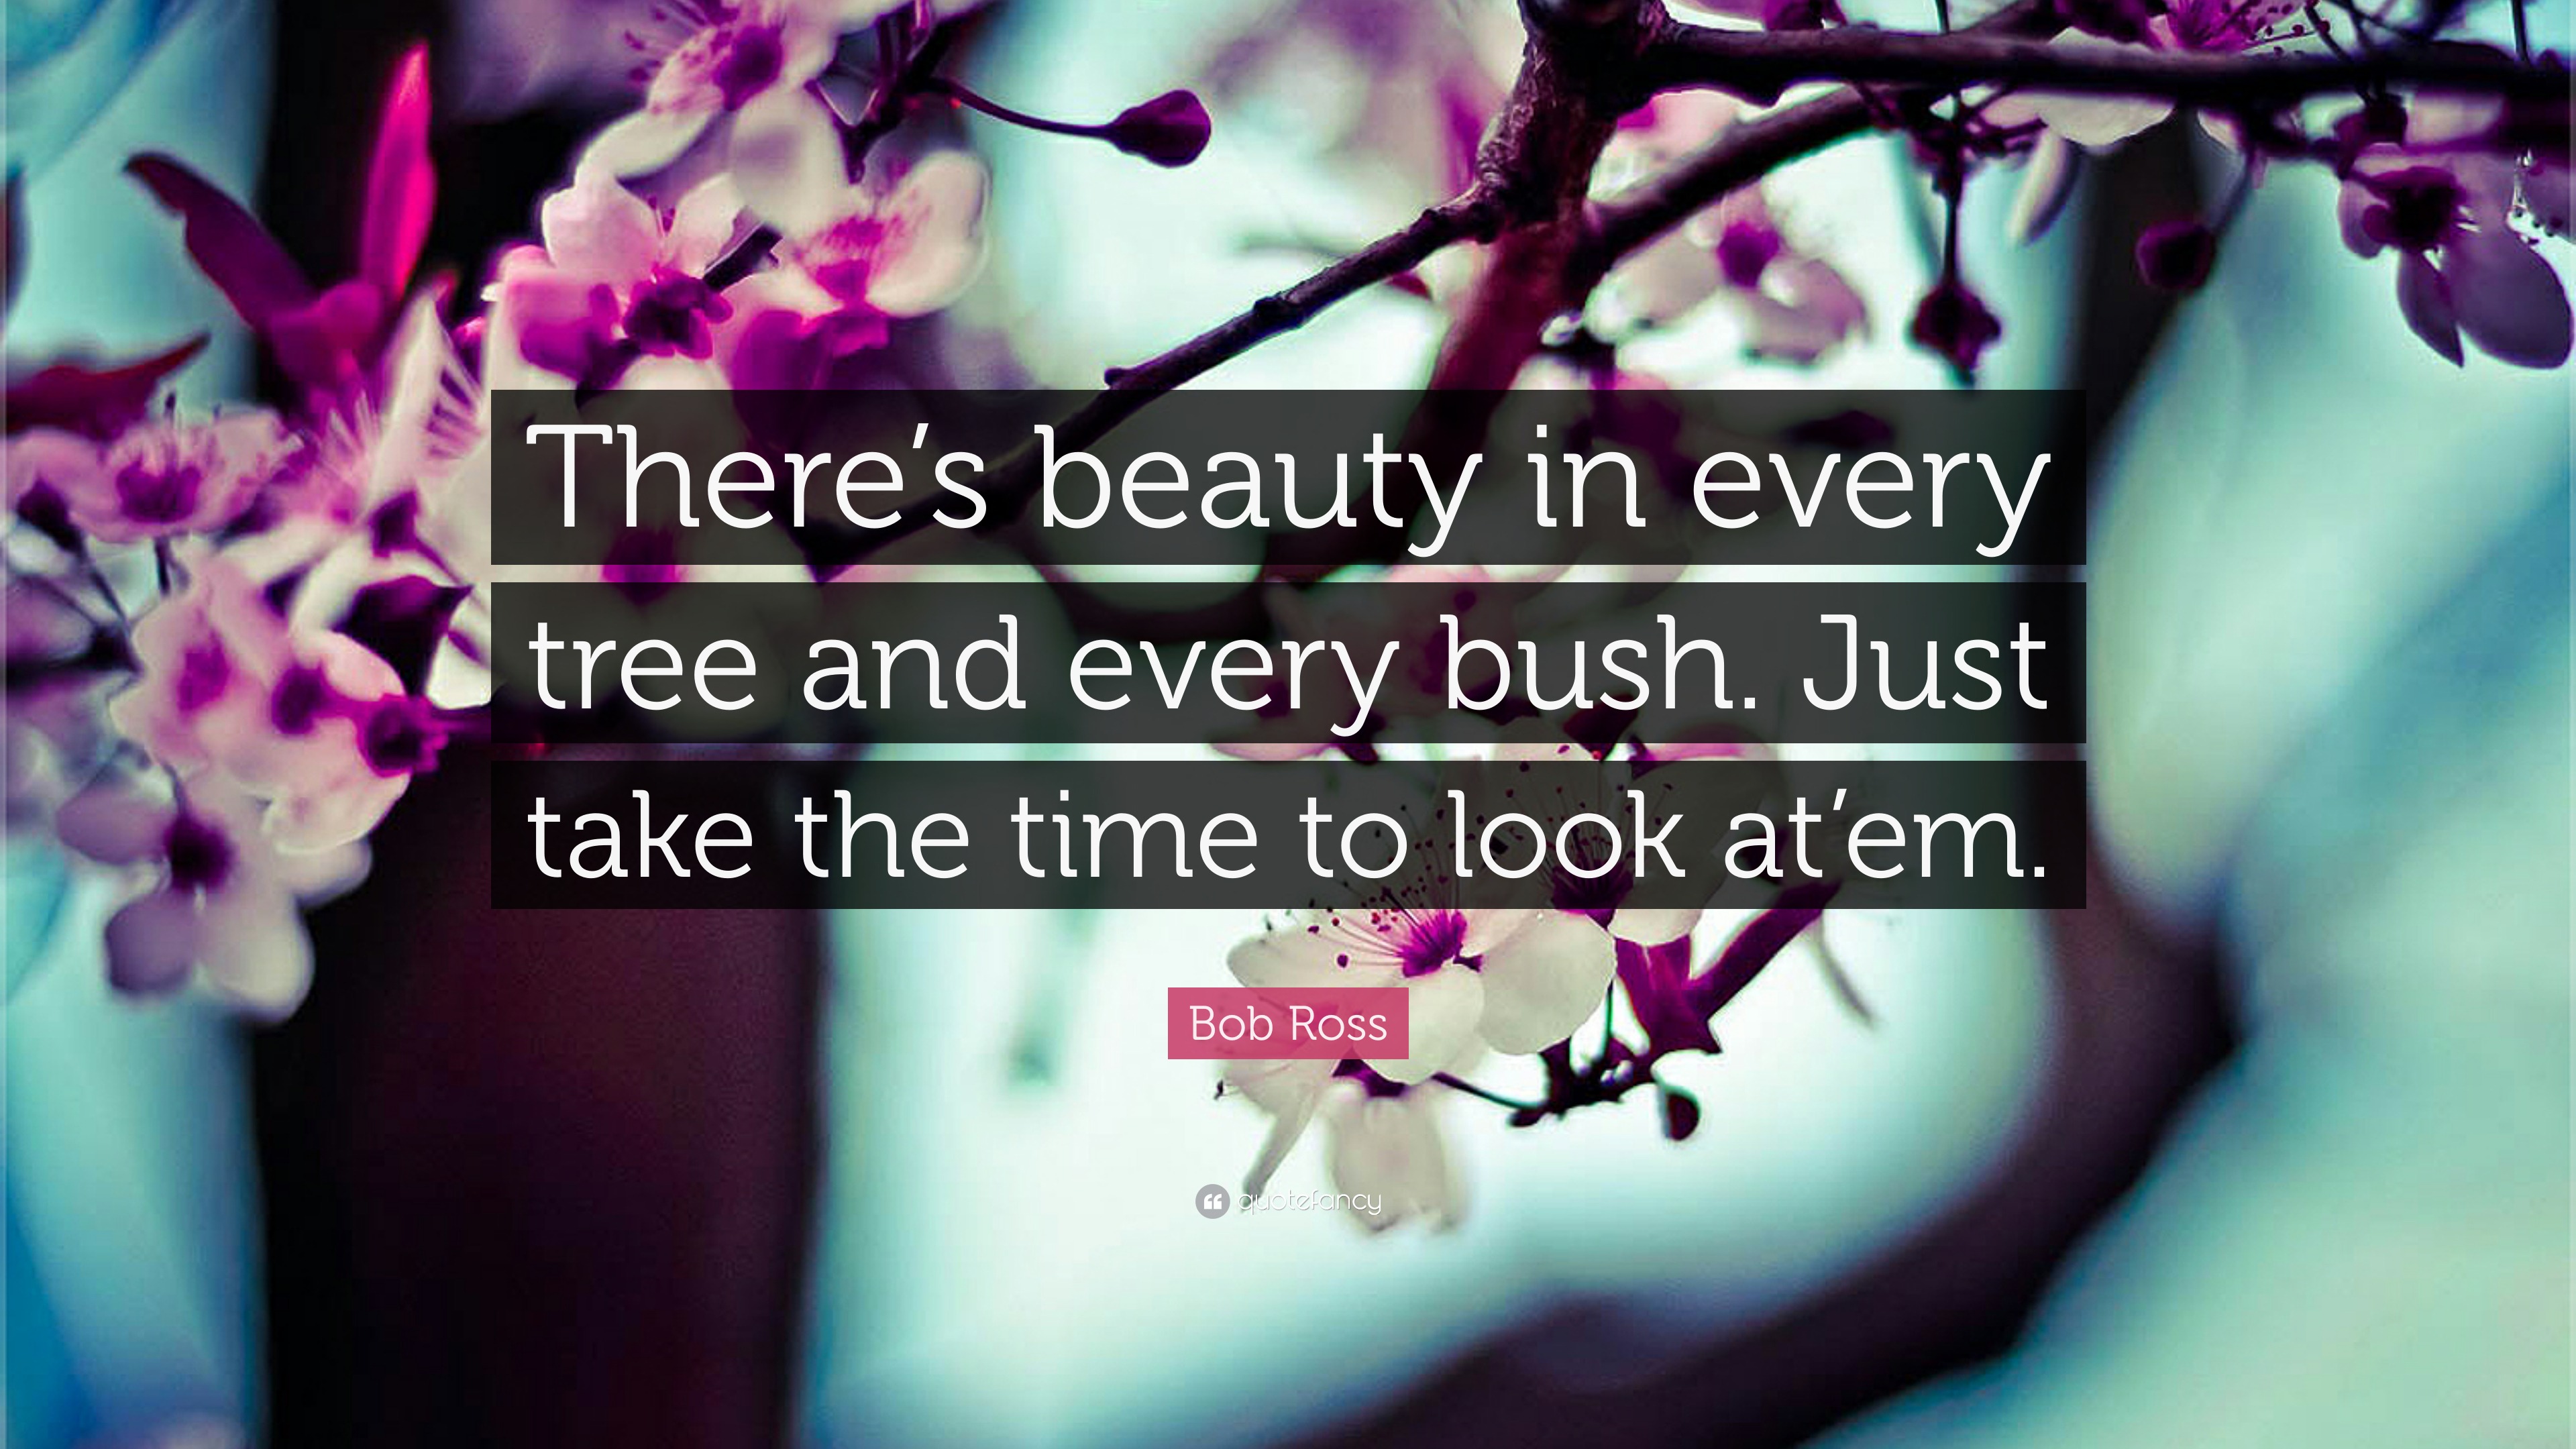 Bob Ross Quote: “There’s beauty in every tree and every bush. Just take ...